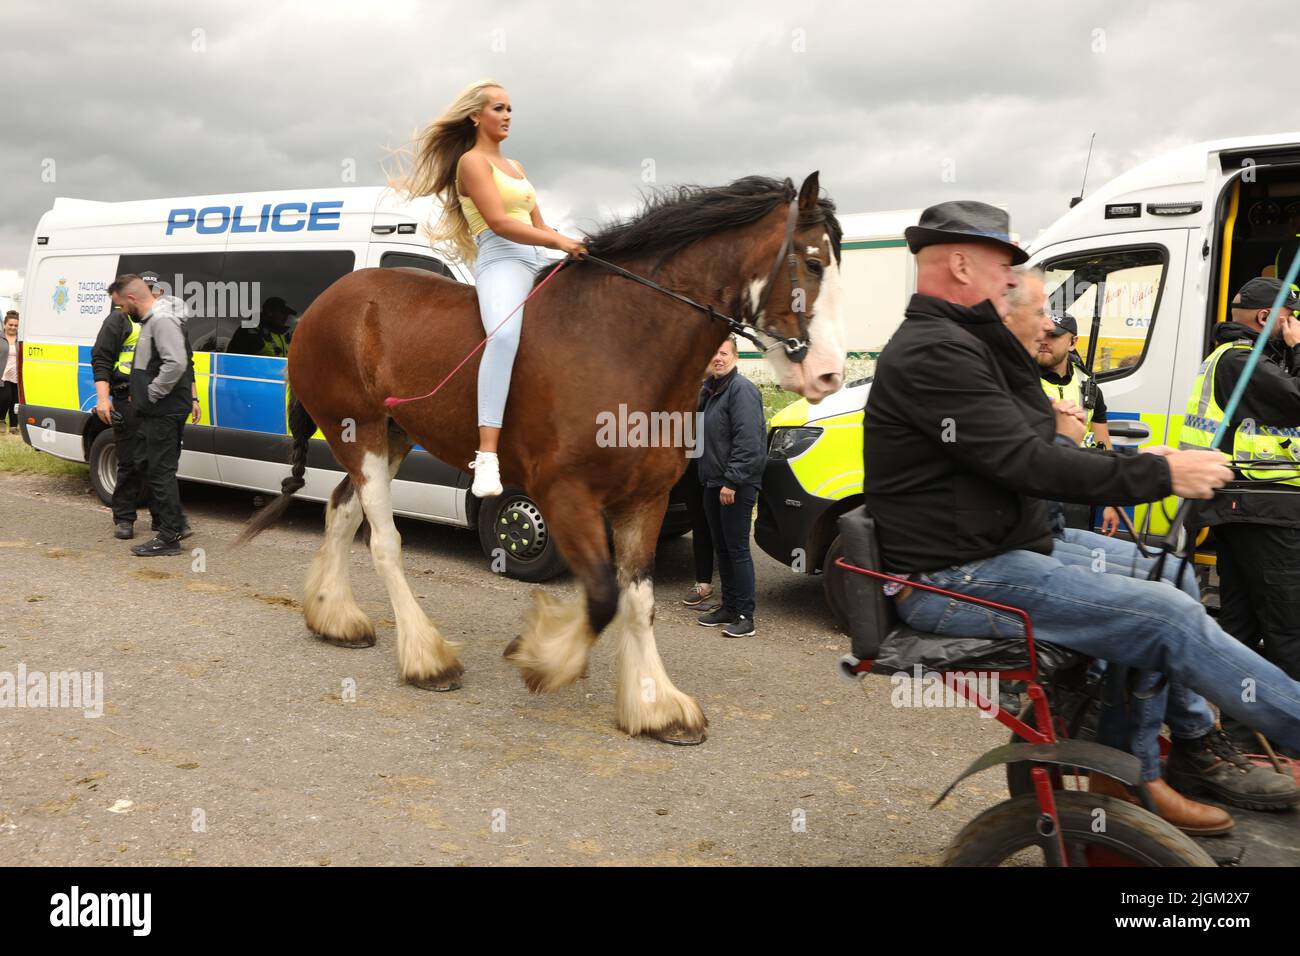 A young woman with long blonde hair riding a shire horse along the road. Appleby Horse Fair, Appleby in Westmorland, Cumbria, England, United Kingdom Stock Photo